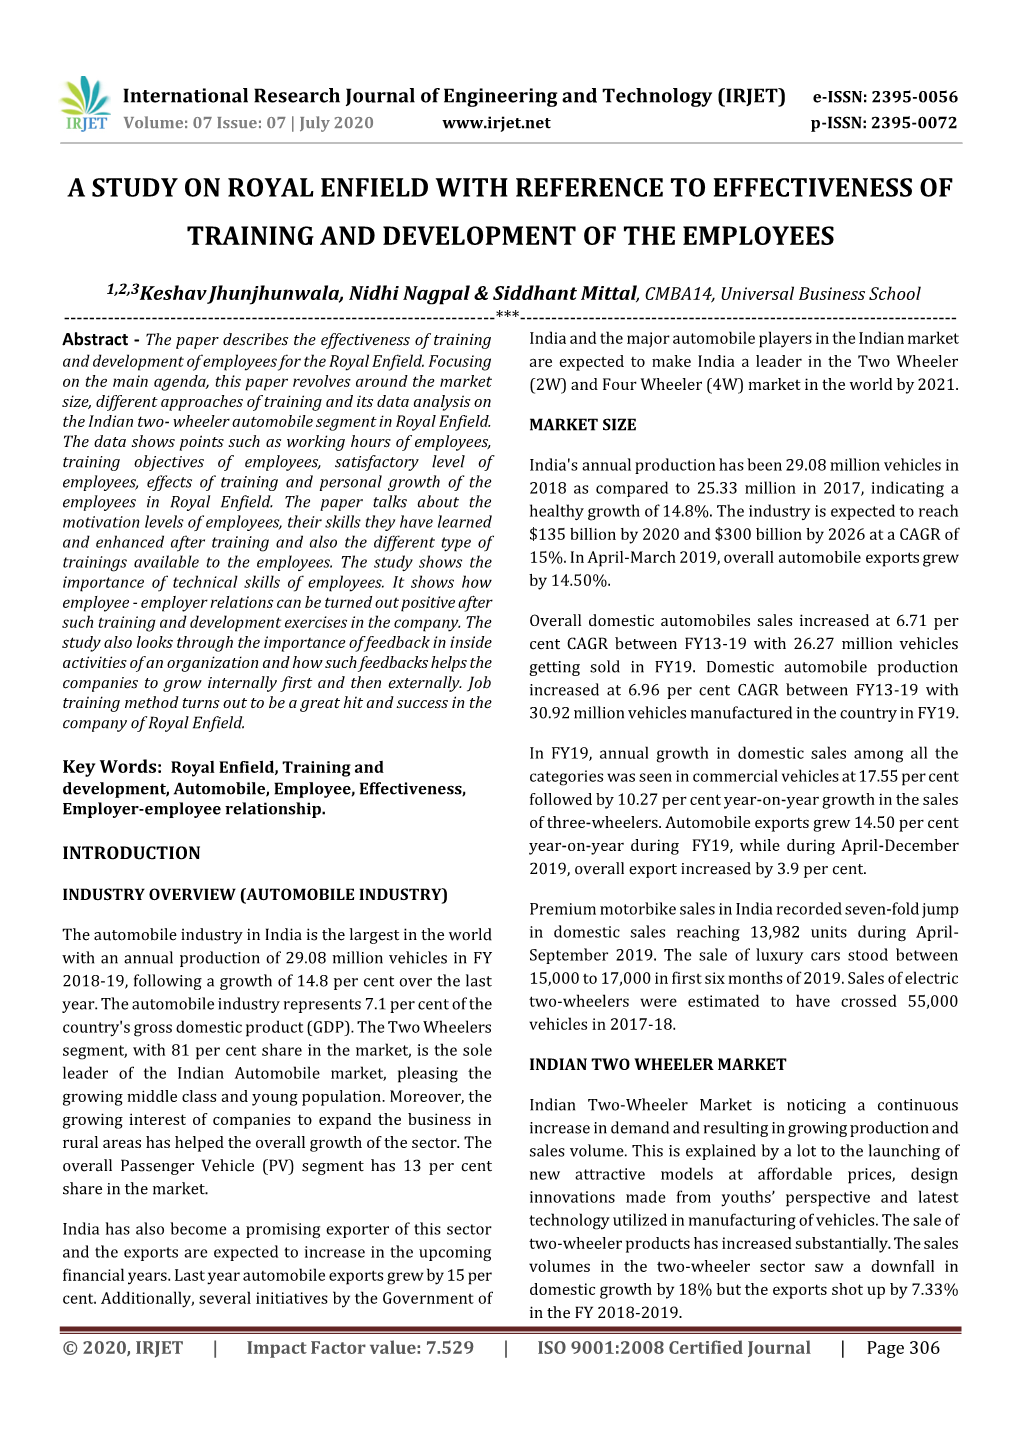 A Study on Royal Enfield with Reference to Effectiveness of Training and Development of the Employees